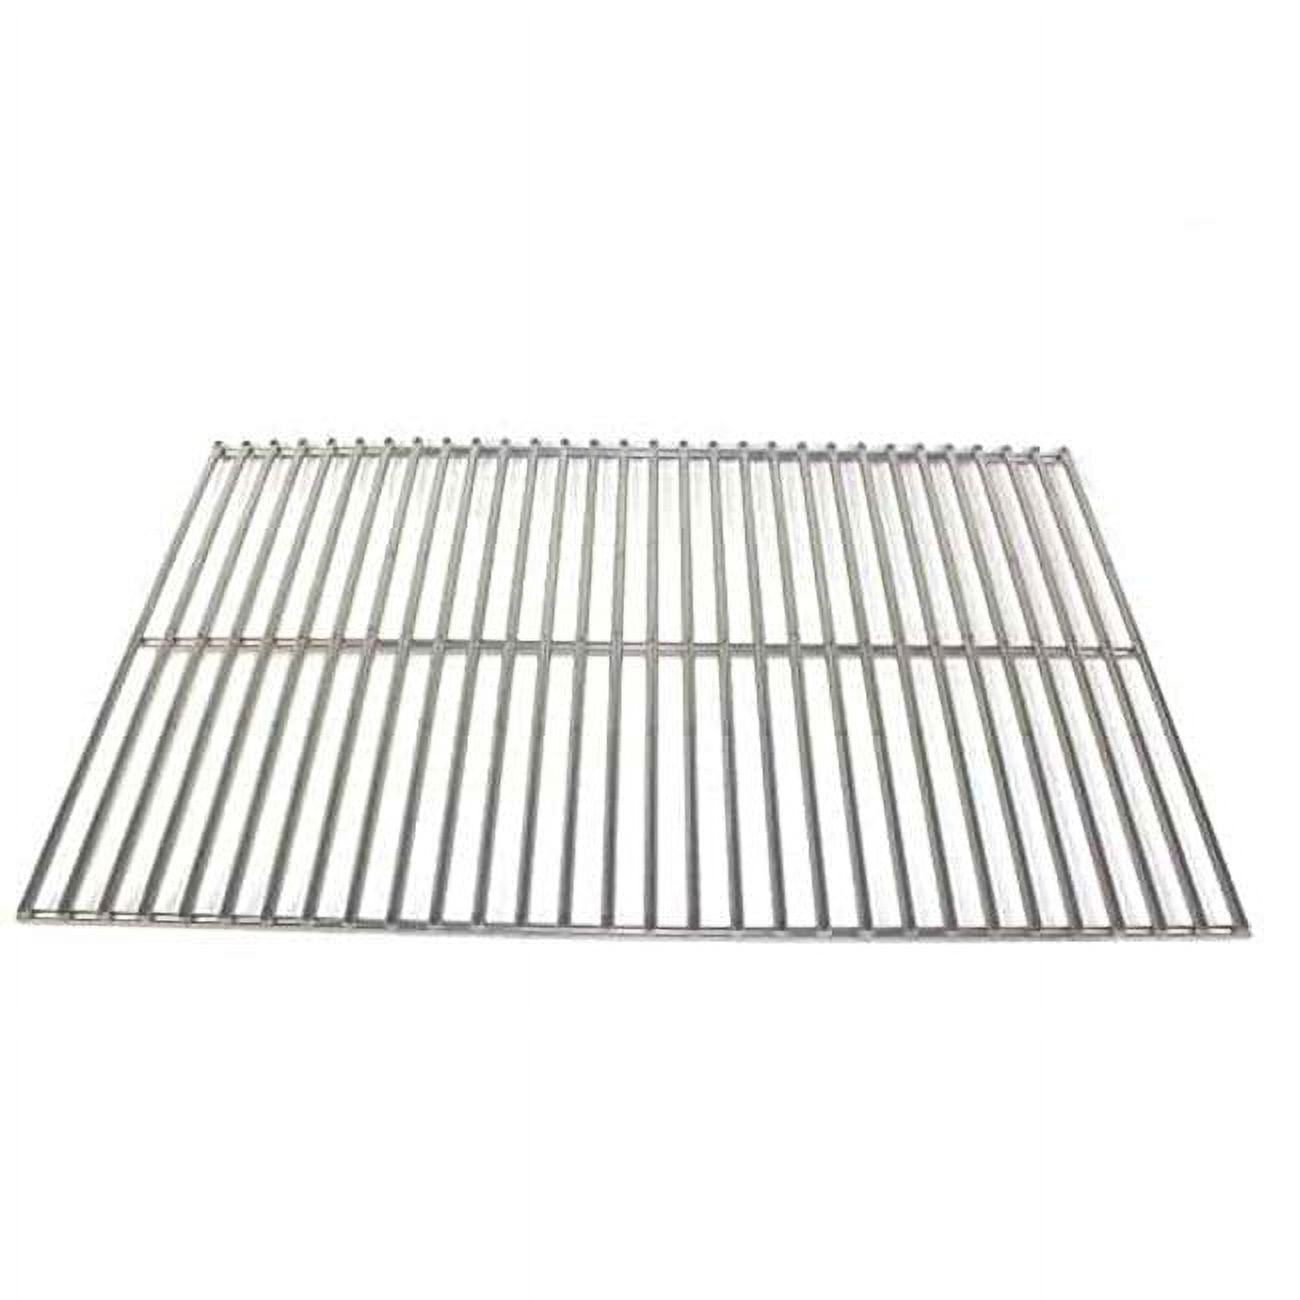 Picture of Modern Home Products GGGRATESS 13.625 x 22 in. Stainless Steel Briquette Grate Grids for WNK